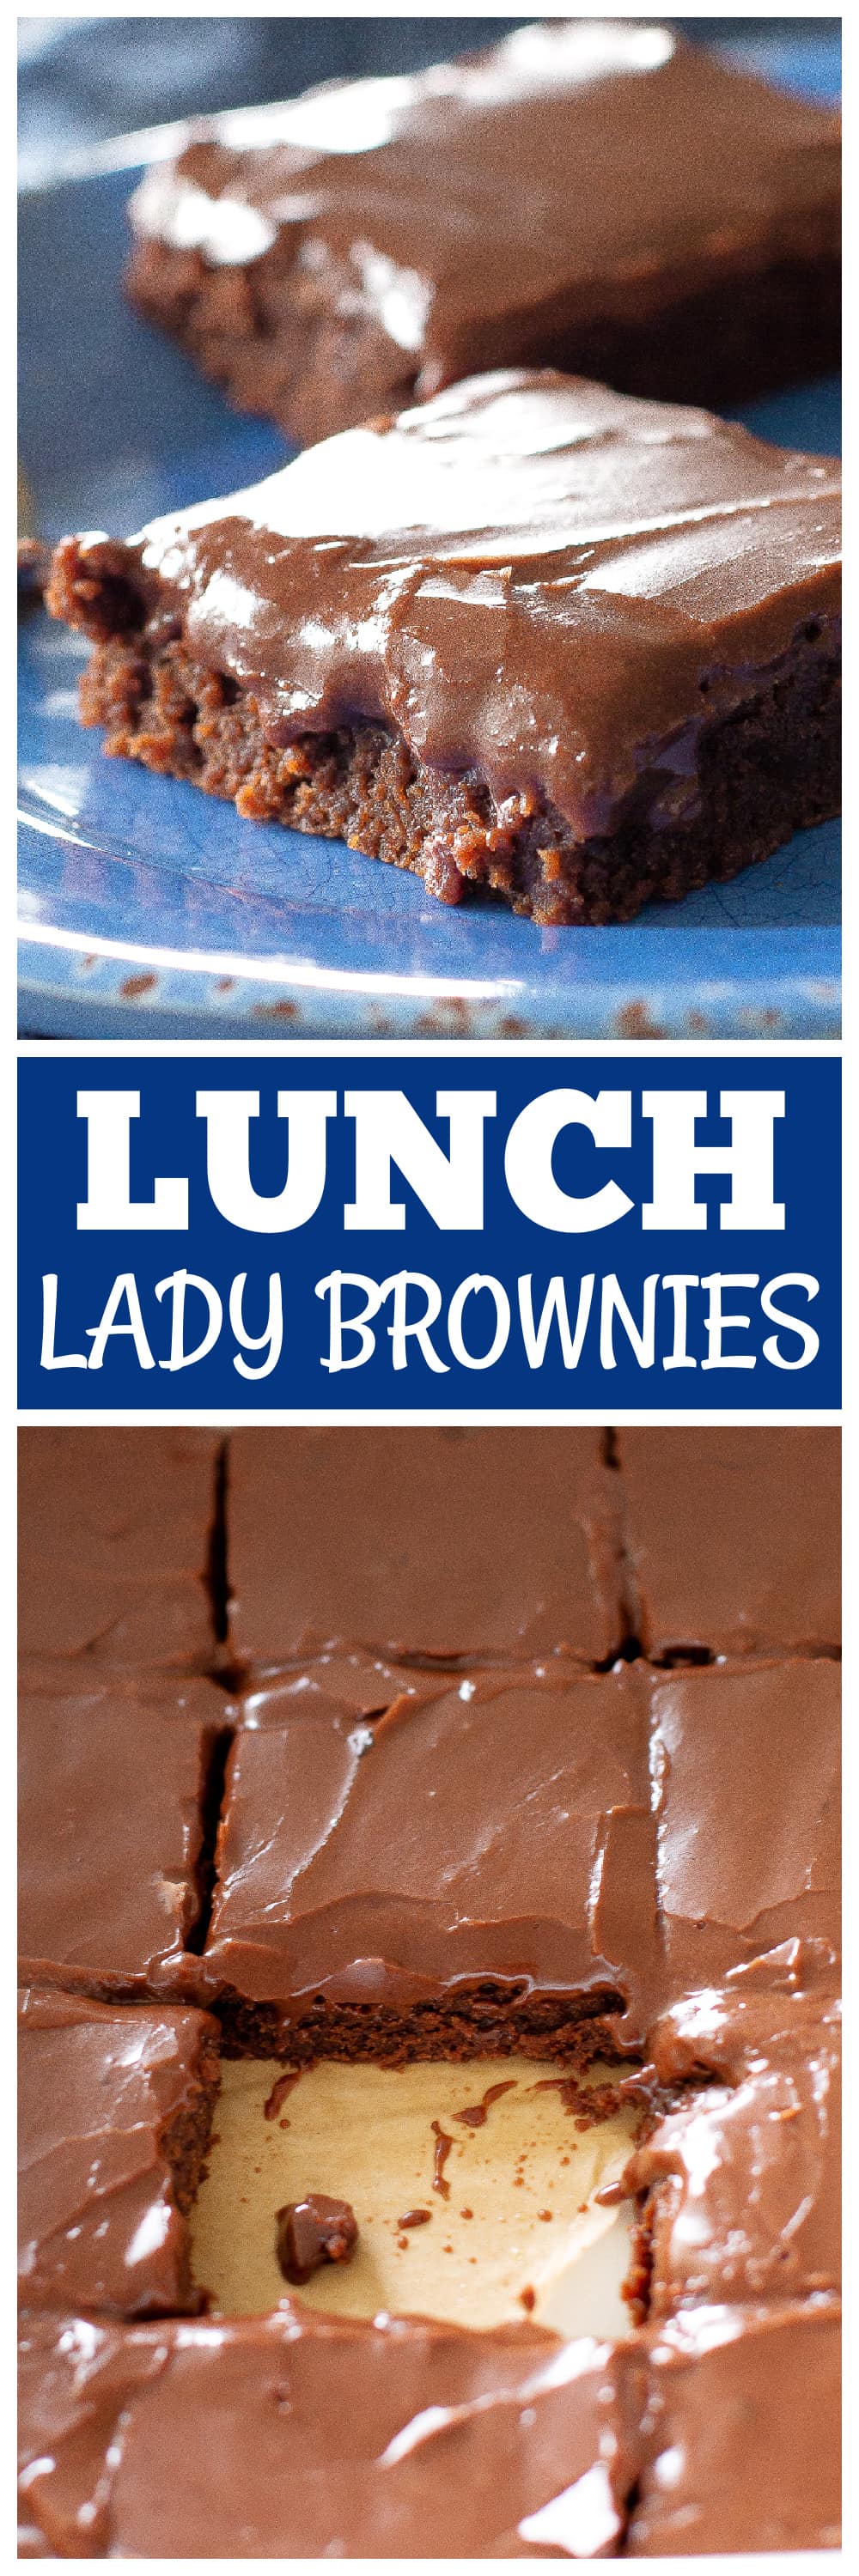 lunch lady brownies 